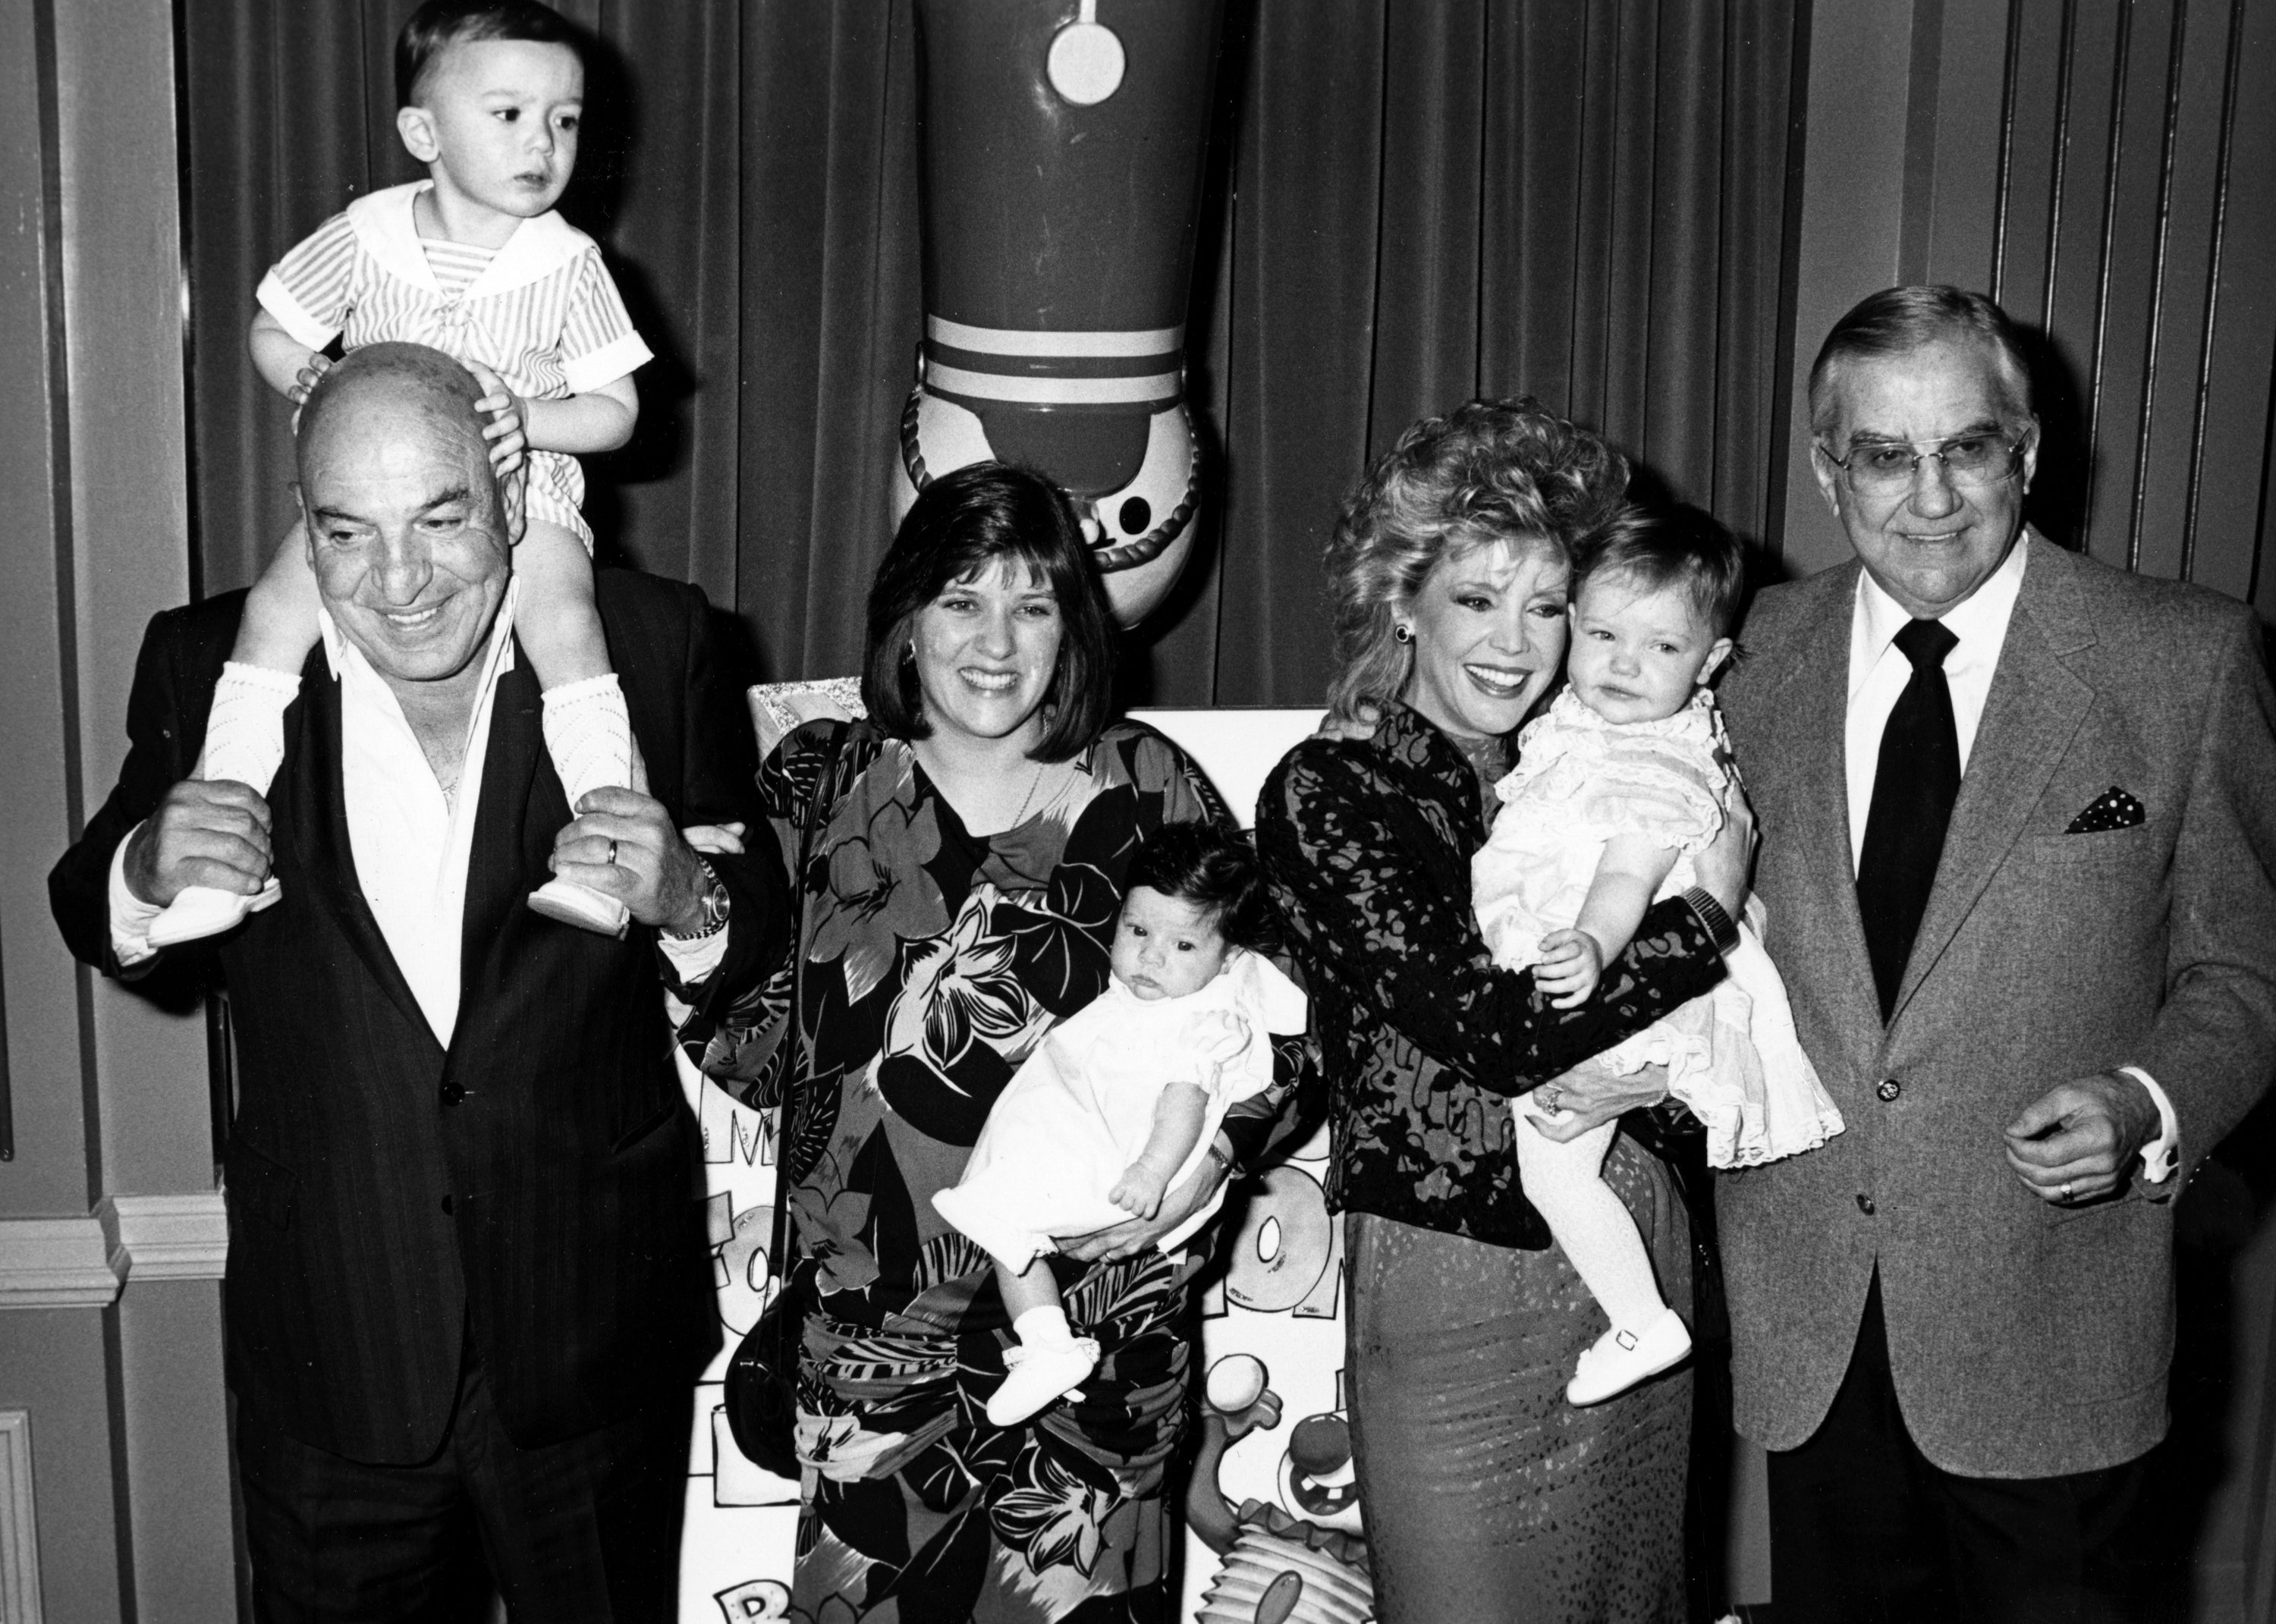 Telly Savalas, wife Julie Hovland, son Christian and daughter Ariana Savalas, Ed McMahon, wife Victoria McMahon and daughter Katherine McMahon at Young Musicians Foundation Celebrity Mother-Daughter Fashion Show on March 26, 1987 | Photo: Getty Images